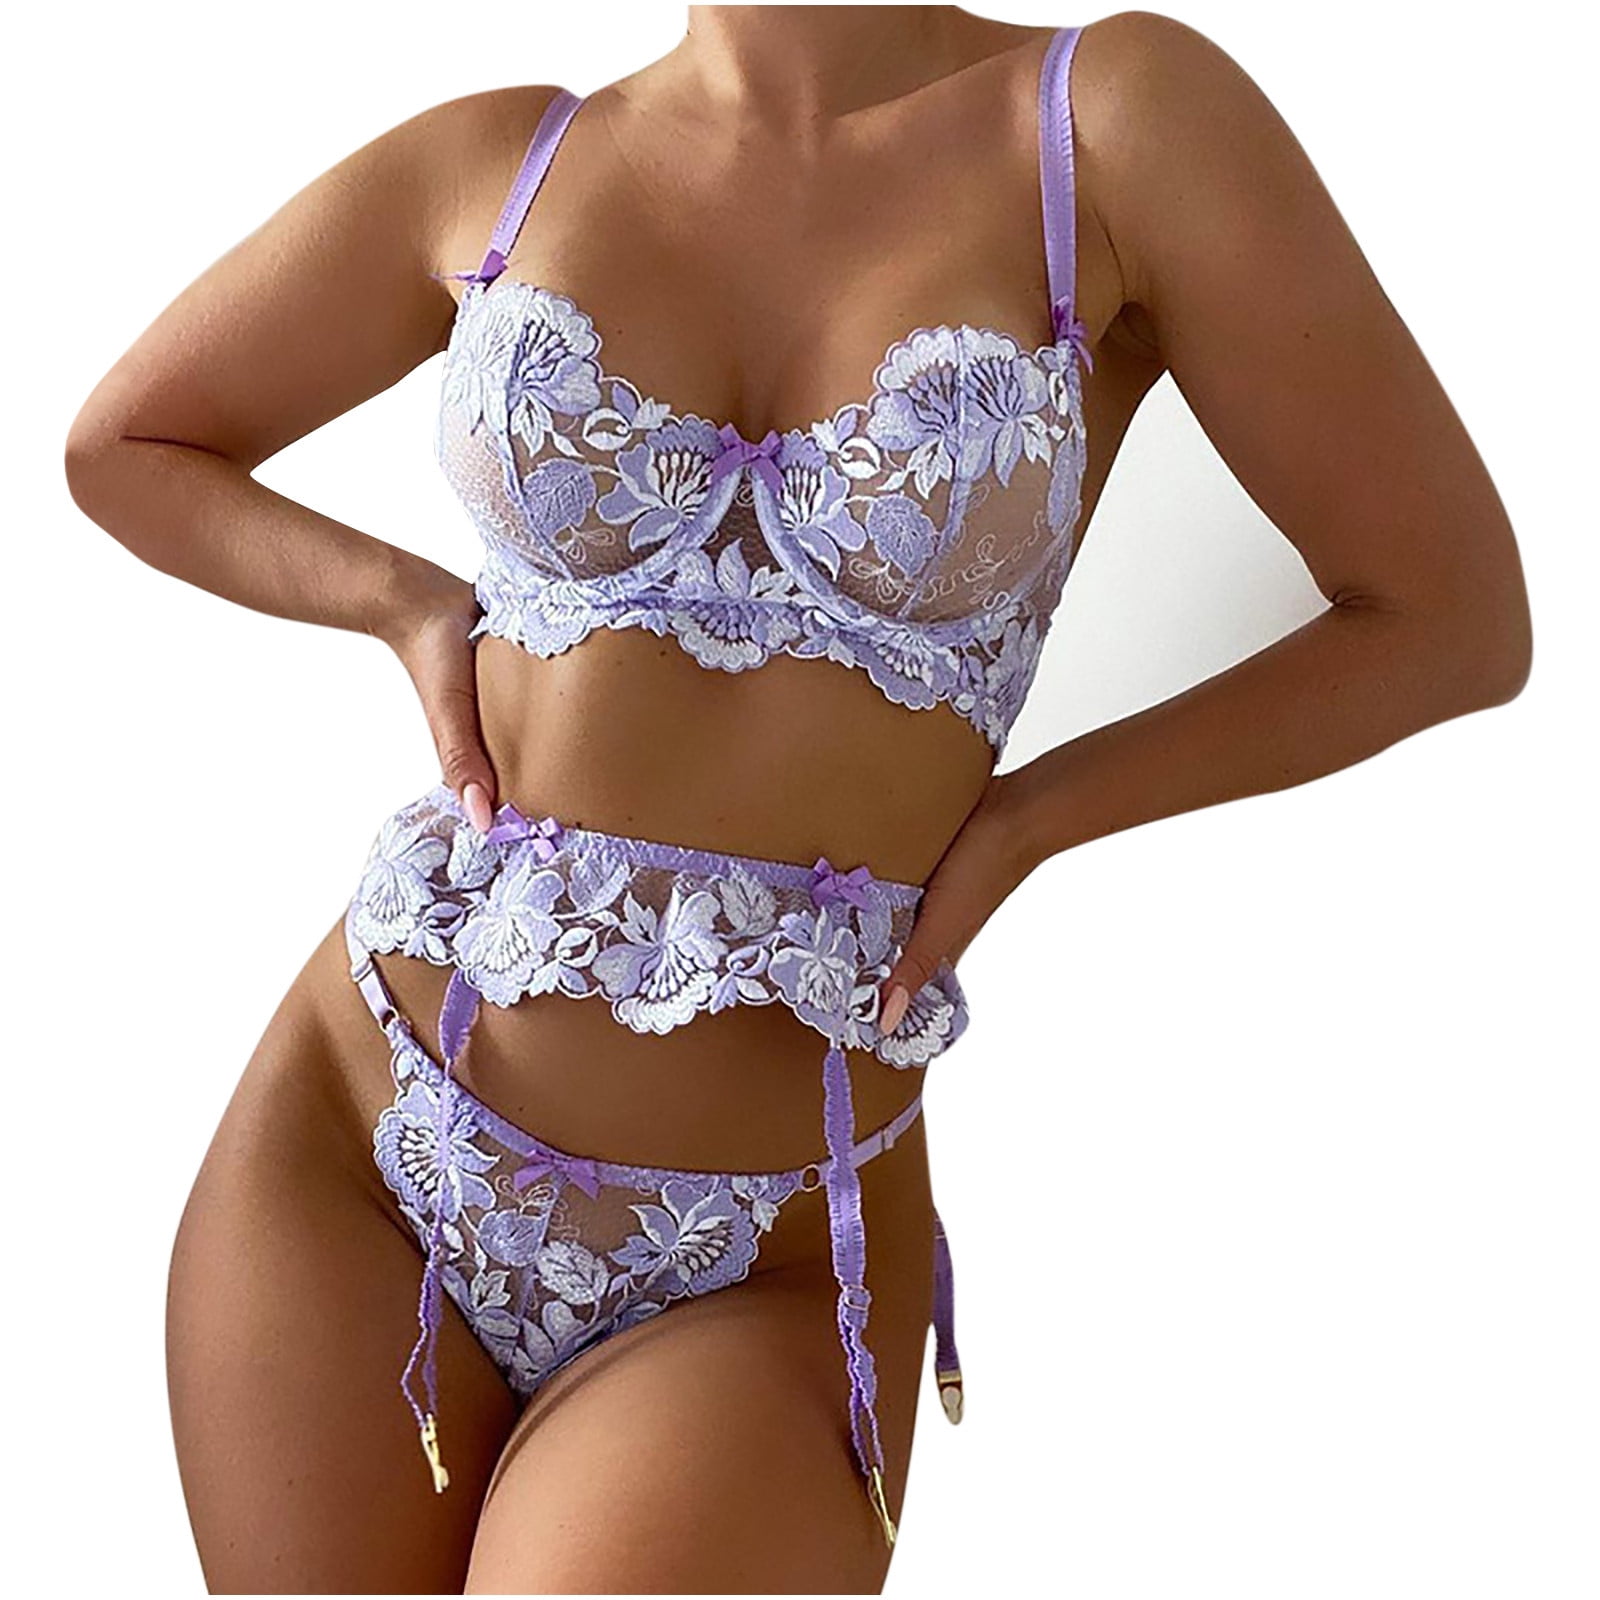 VerPetridure Sexy Lingerie for Women Plus Size Fashion Women Sexy Lace  Underwear Pajamas Embroidered Ladies Intimates Set